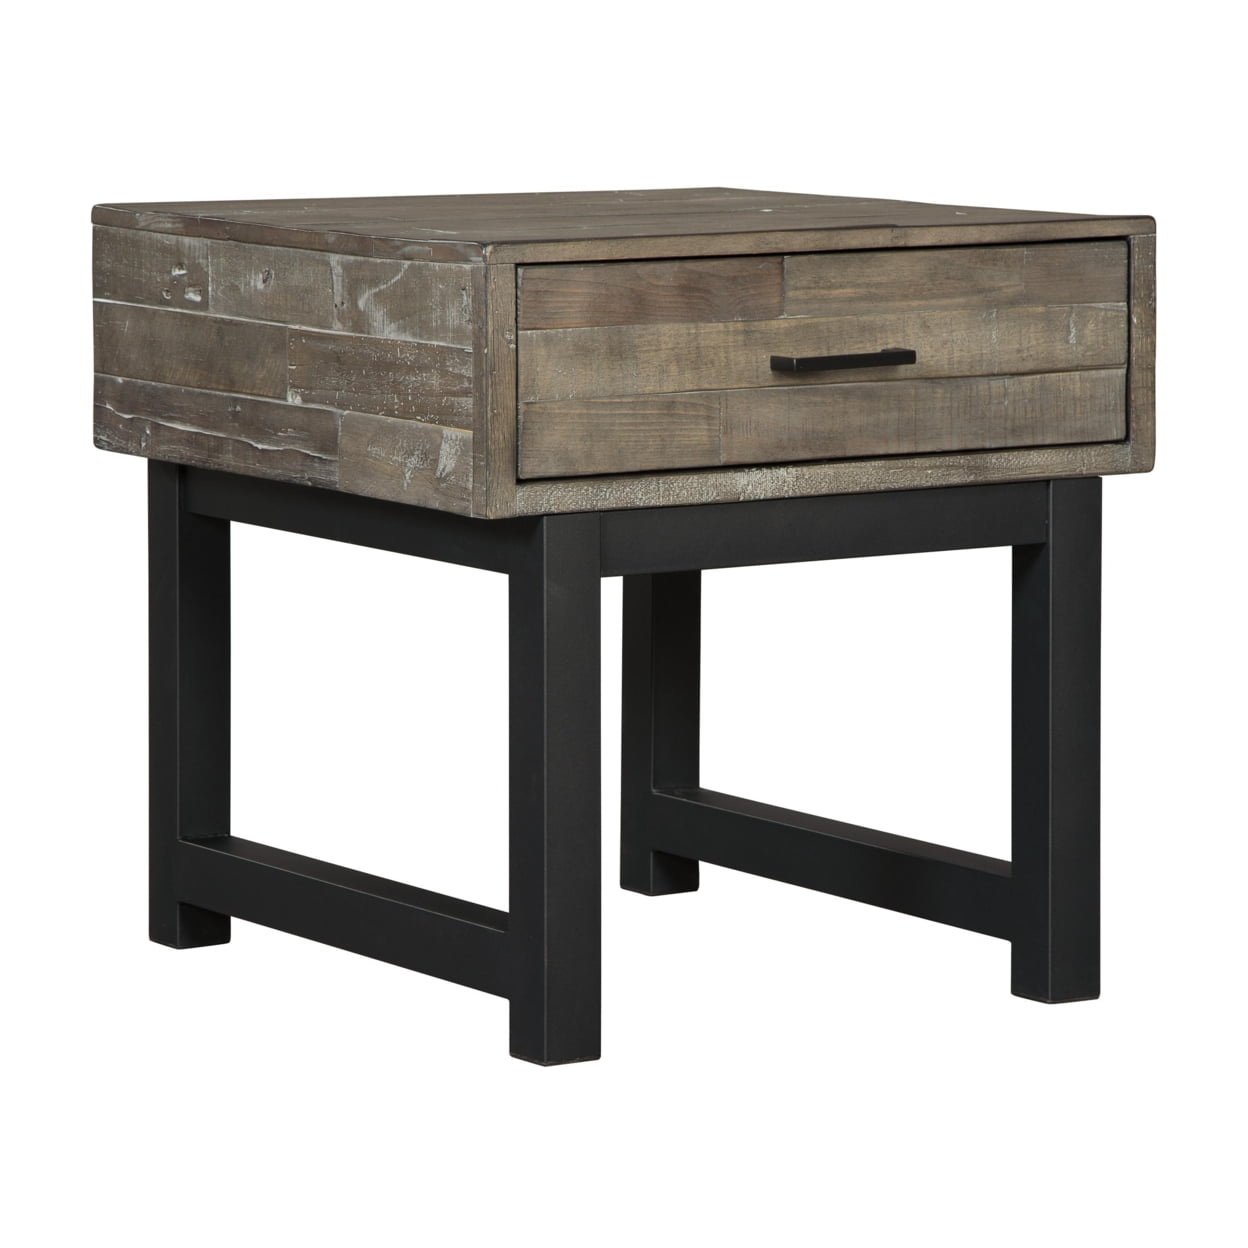 Picture of Benjara BM210875 Square Butcher Block Wooden End Table with 1 Drawer - Brown & Black - 24.25 x 24.13 x 24 in.